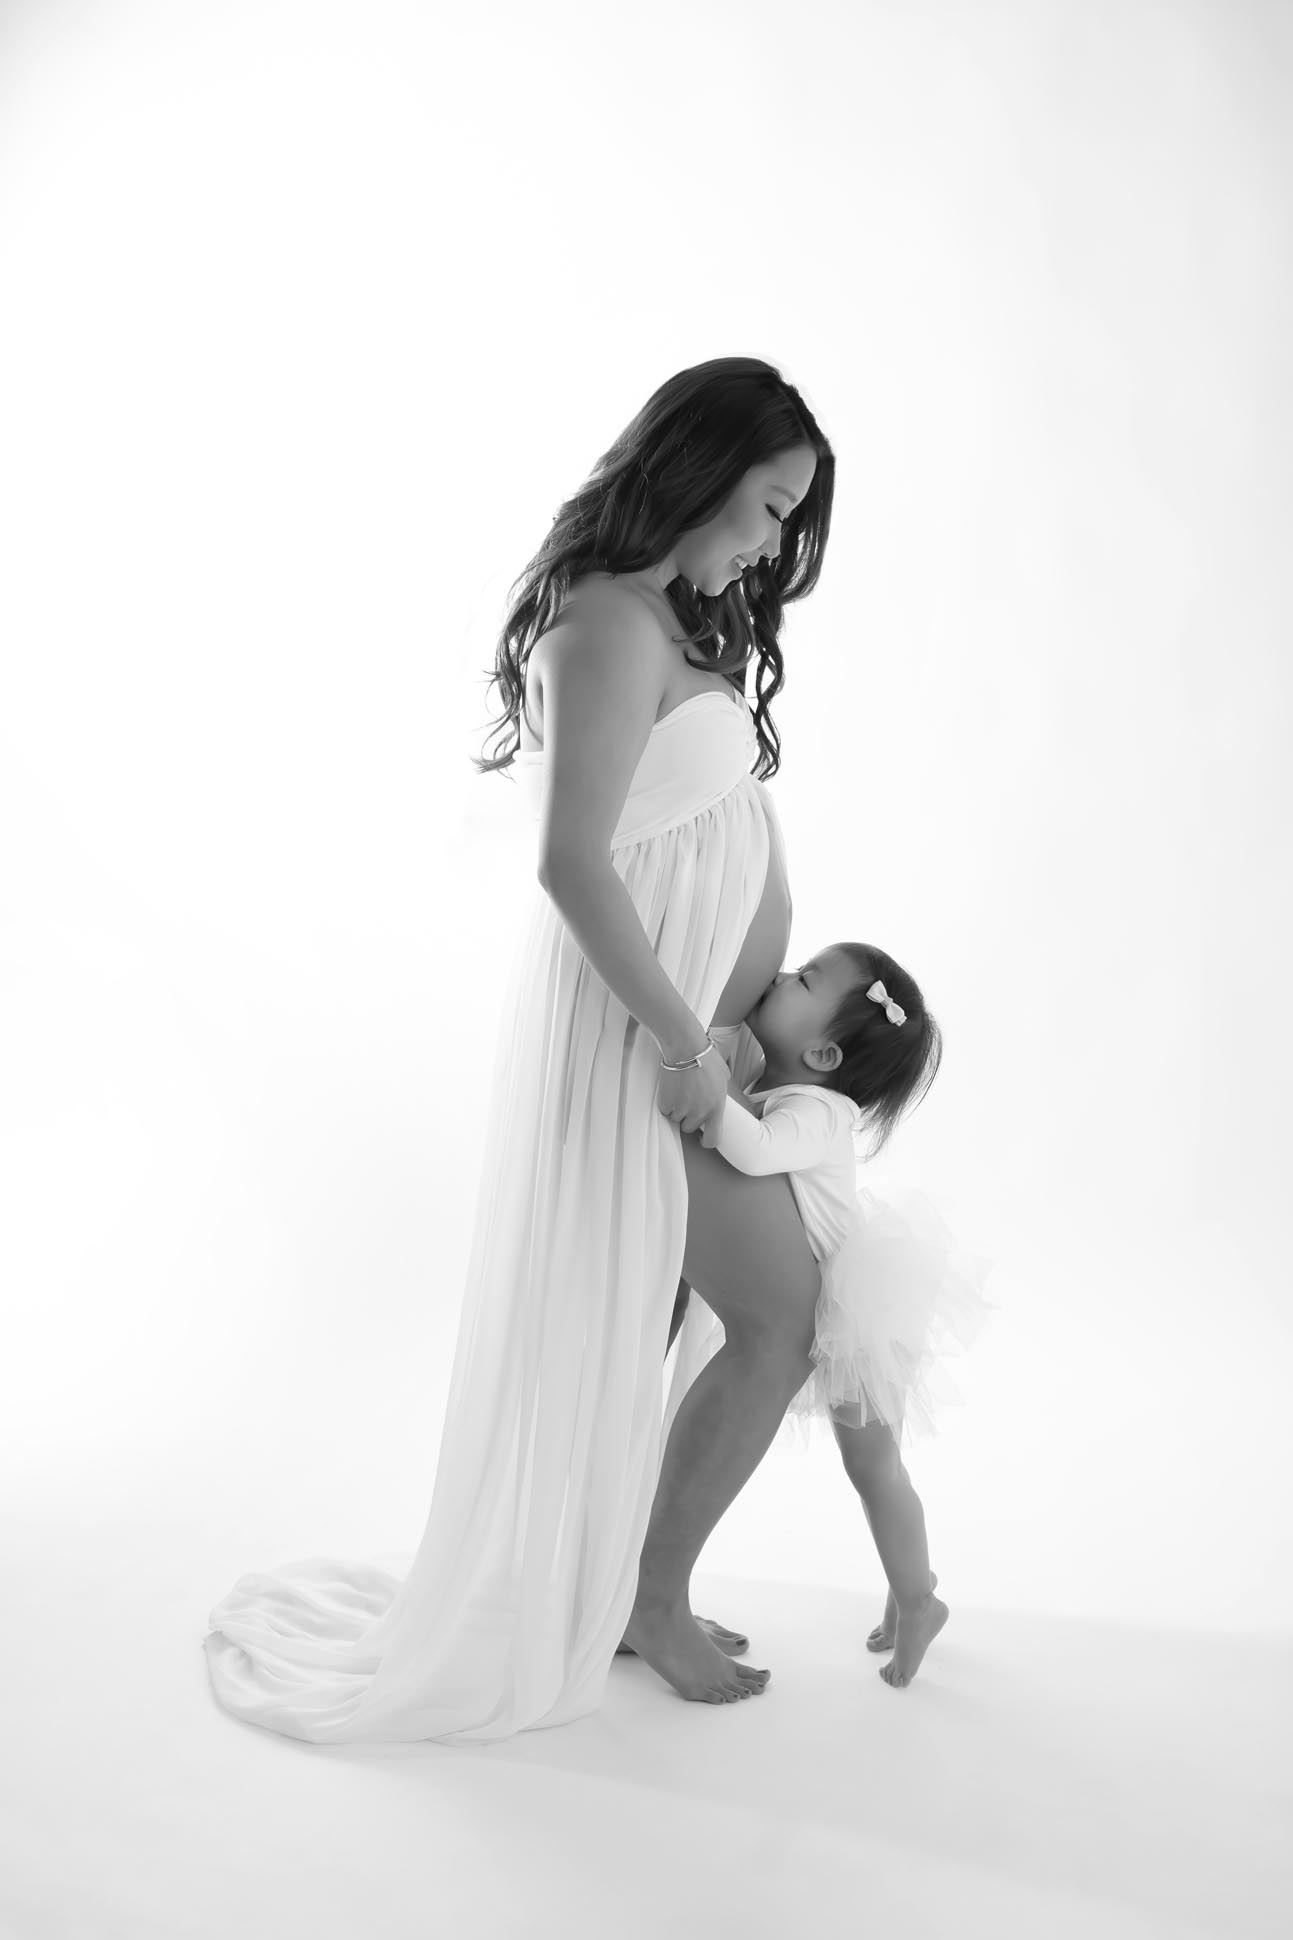 Dallas maternity photographer shares portrait of mom to be with big sister sibling kissing belly both are wearing all white dresses